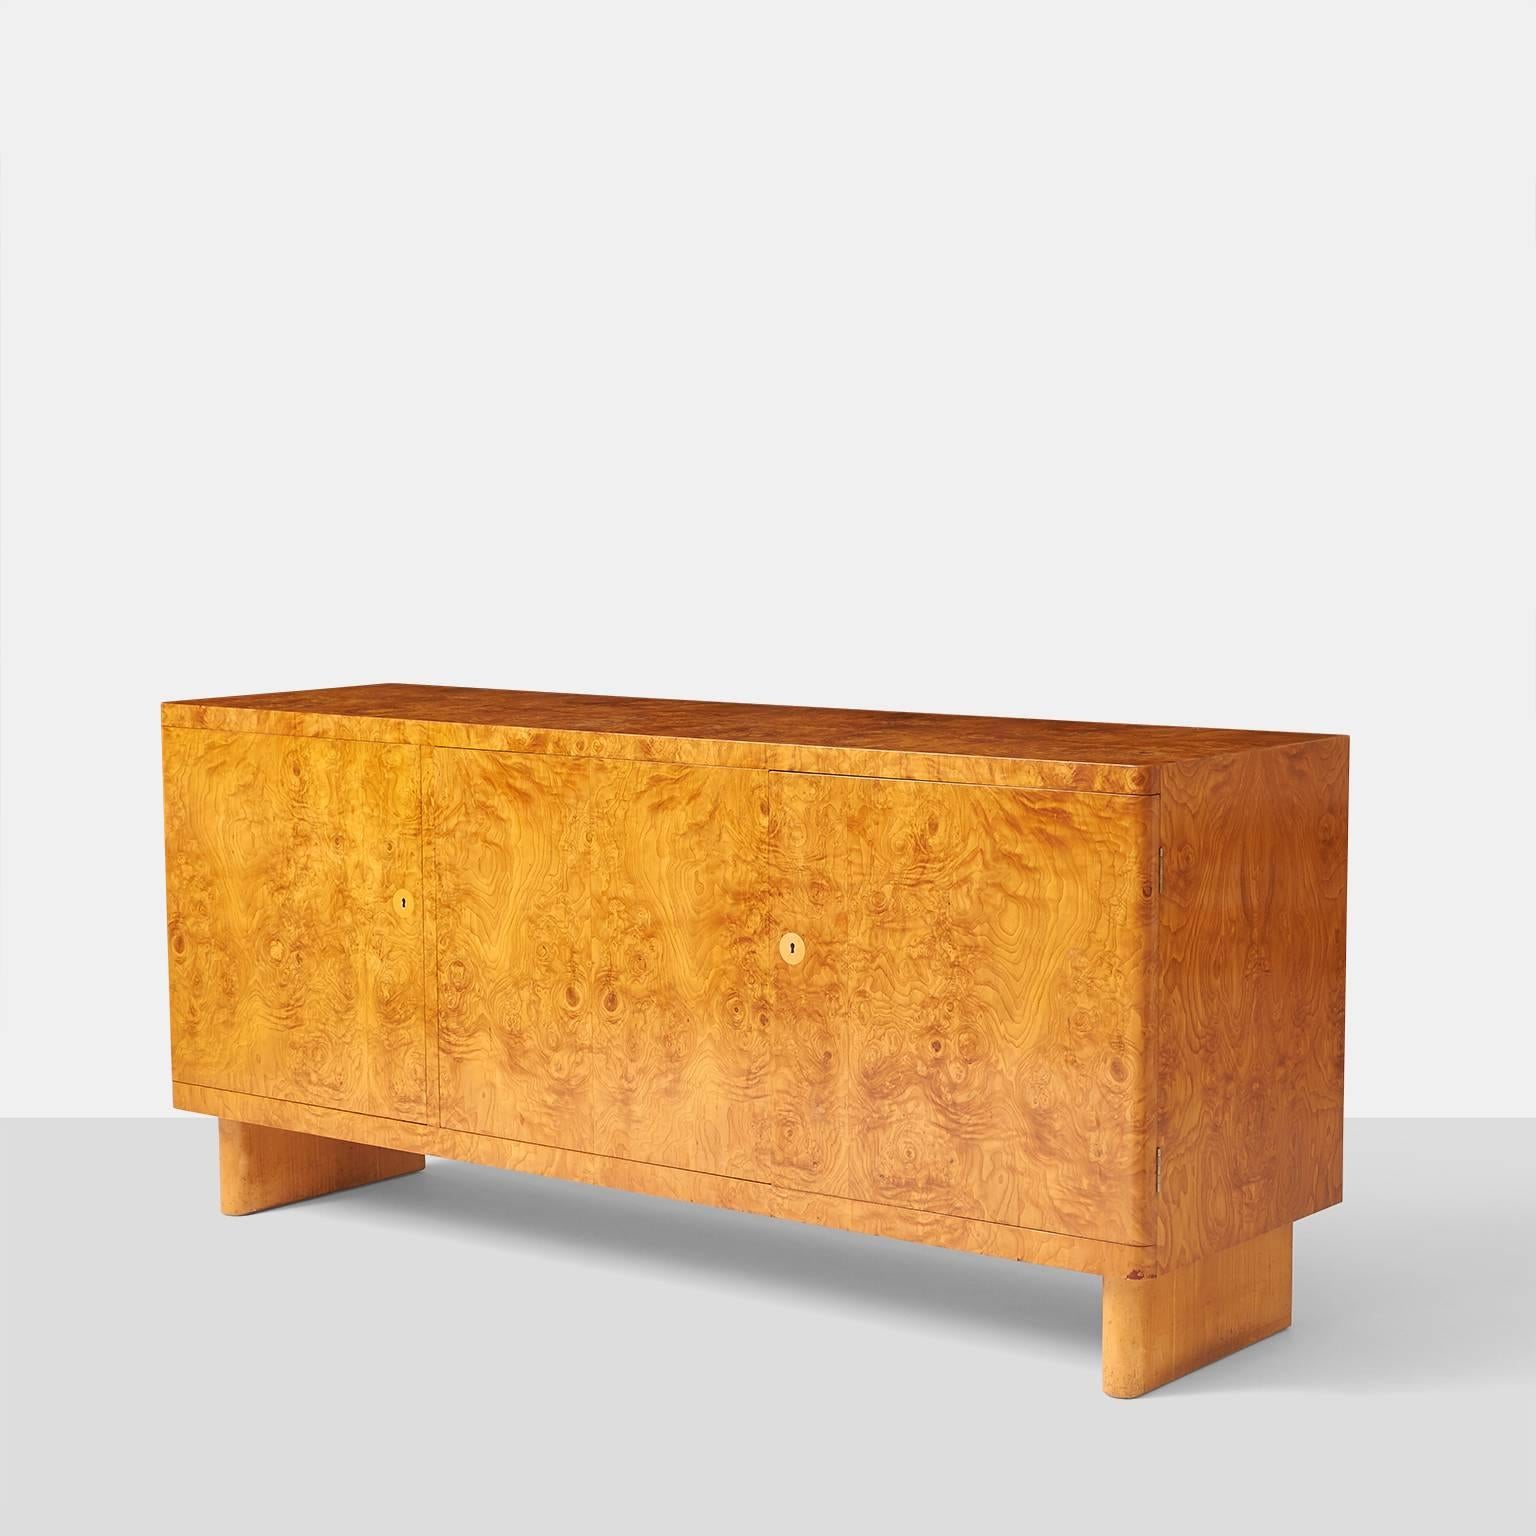 A rare root wood veneered sideboard designed in 1935 by Architect Axel Einar Hjorth. Cabinet has three doors with adjustable shelves on two right sections and the left side having three felt lined pull out drawers. The cabinet retains the original